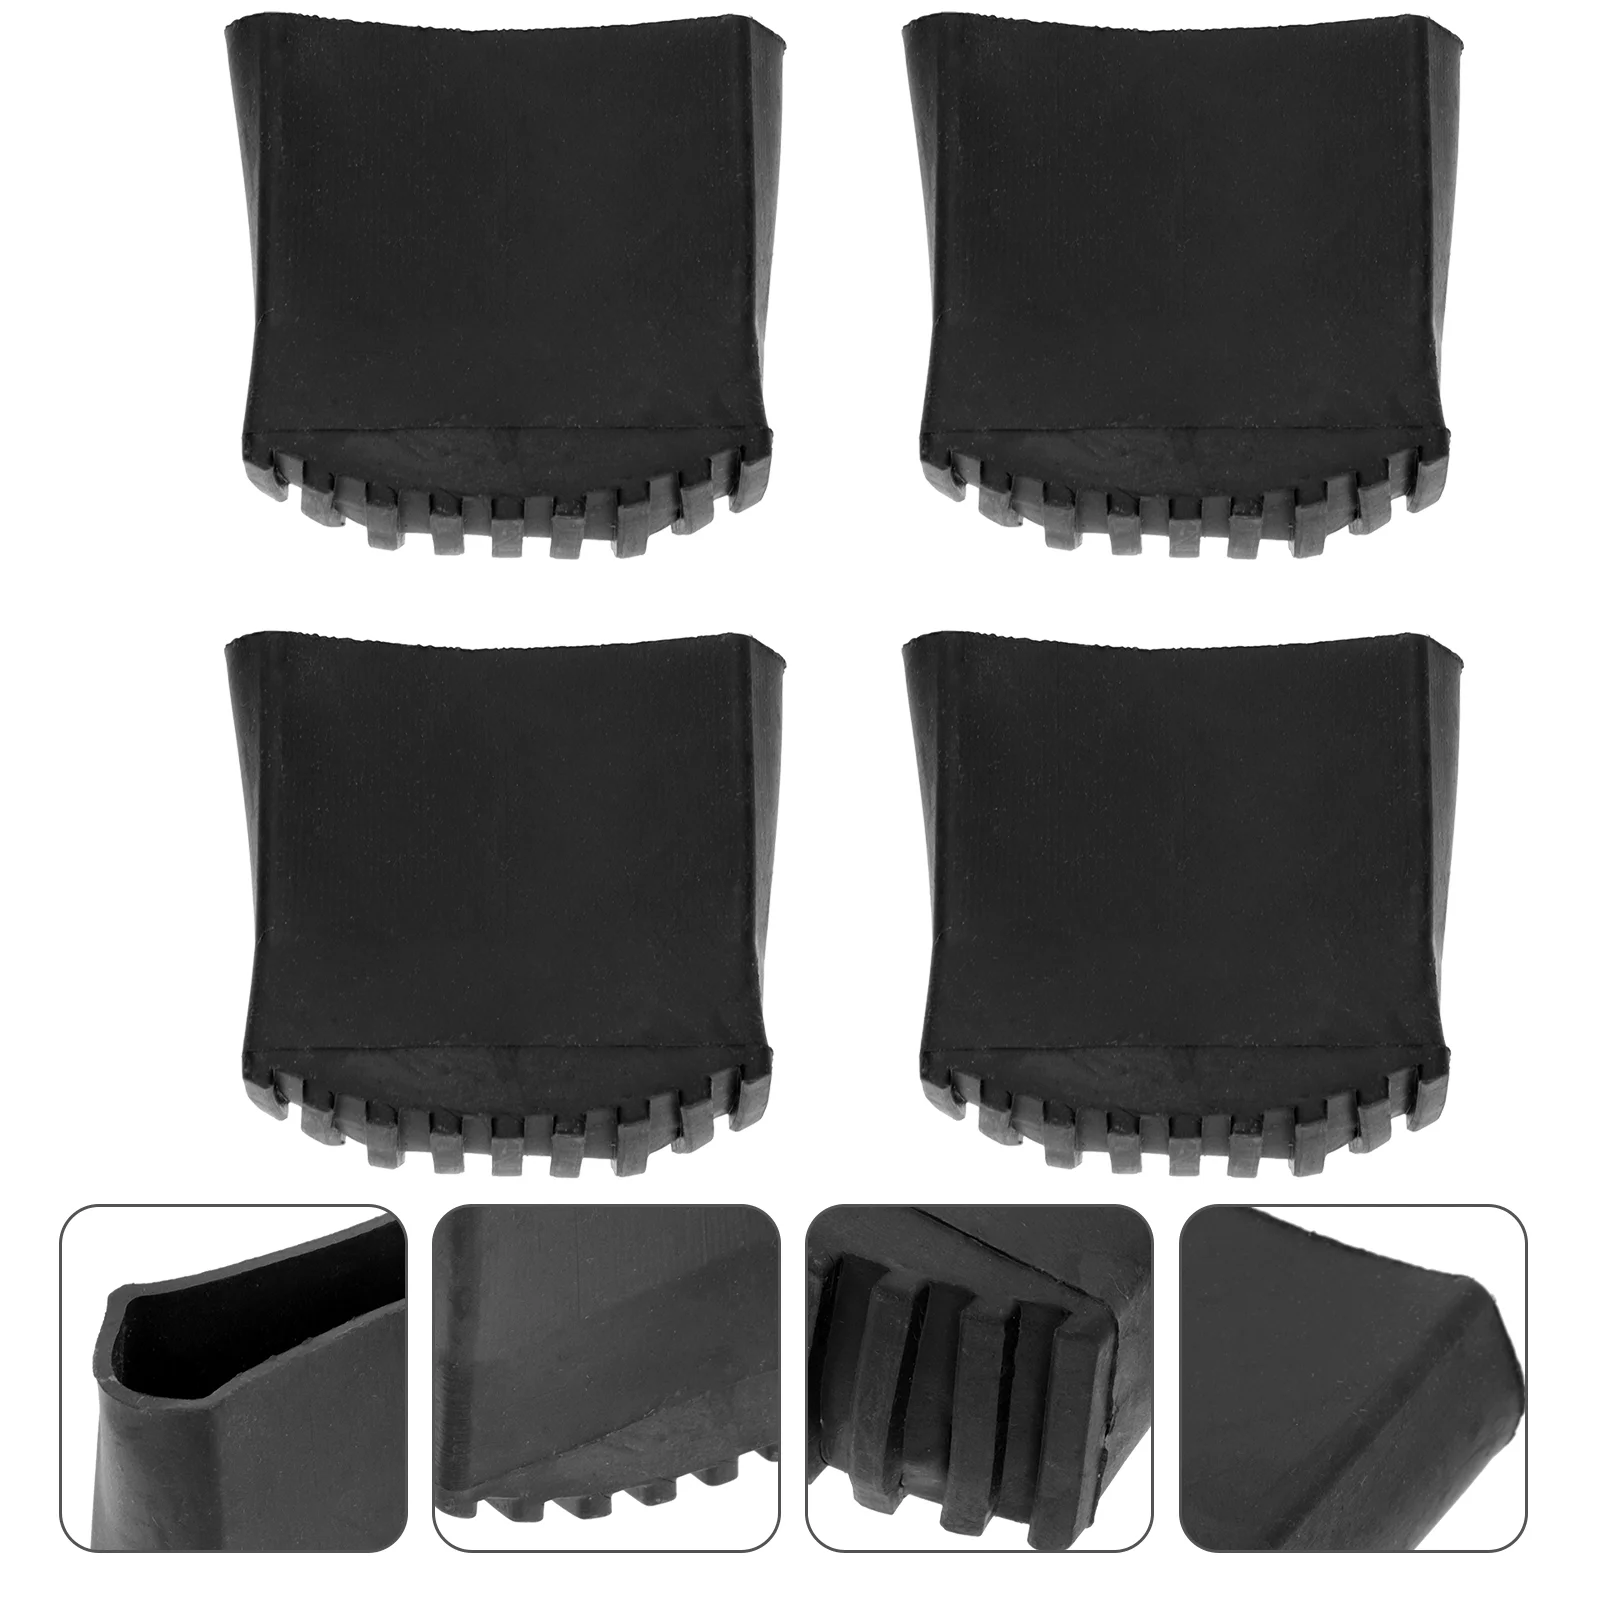 

4 Pcs Ladder Feet Leg Protectors Chairs Safe Pads Rest Mat Boots Non-slip Rubber Protective Covers Wear-resisting